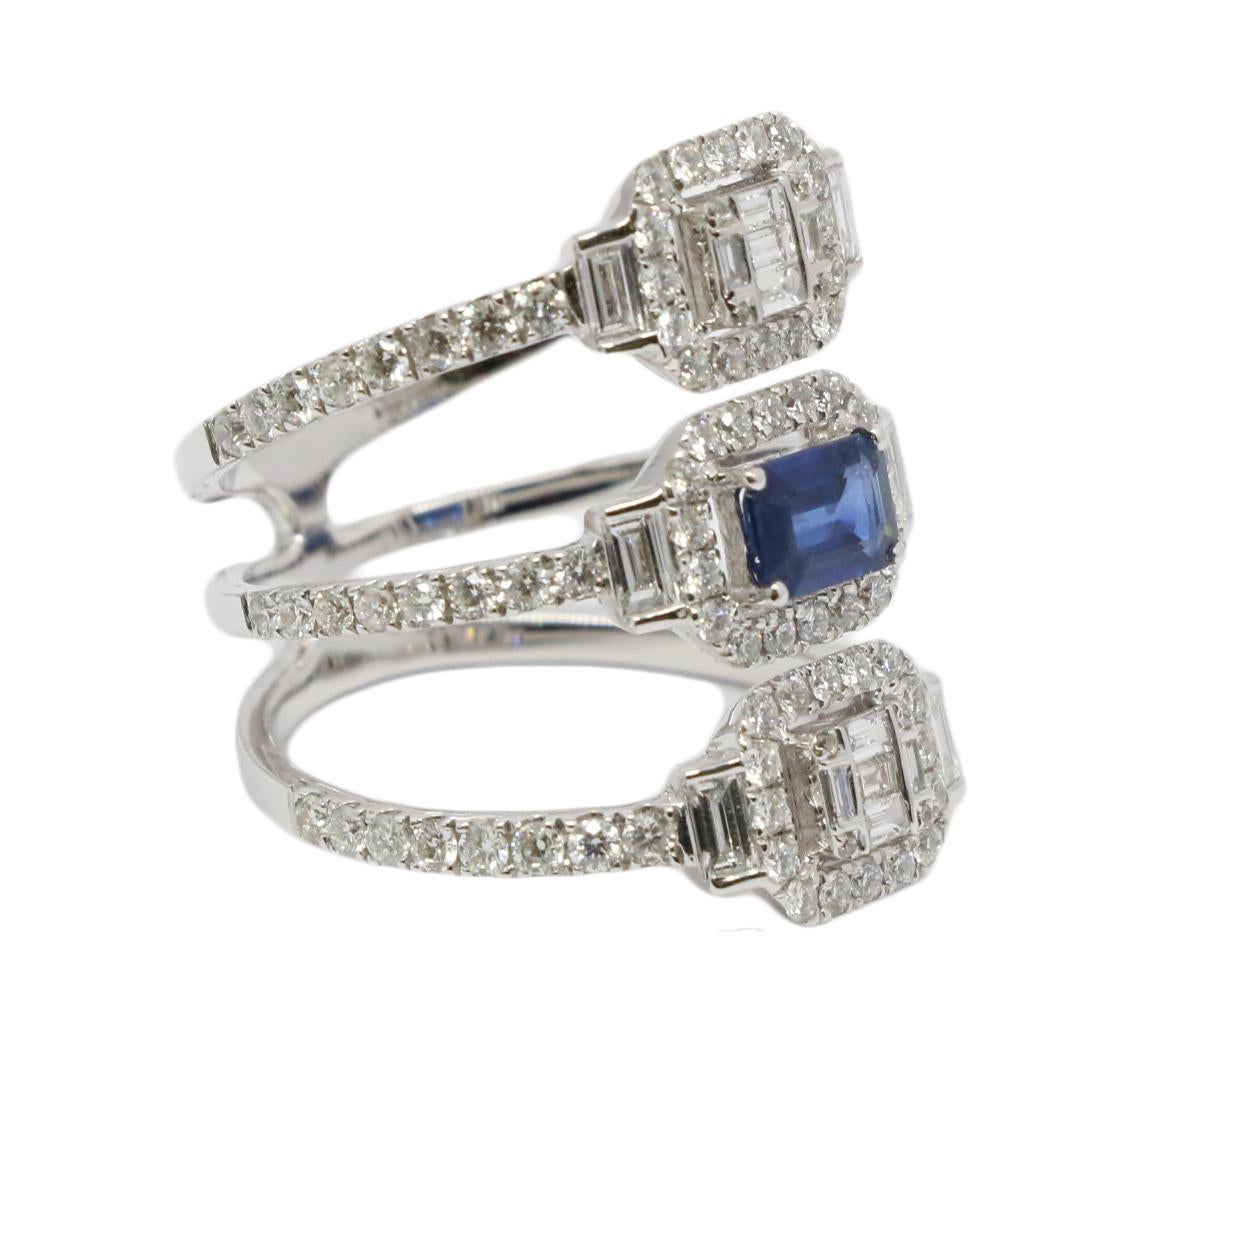 Triple Band Emerald Cut Sapphire and Diamond White Gold Ring In Excellent Condition For Sale In Naples, FL